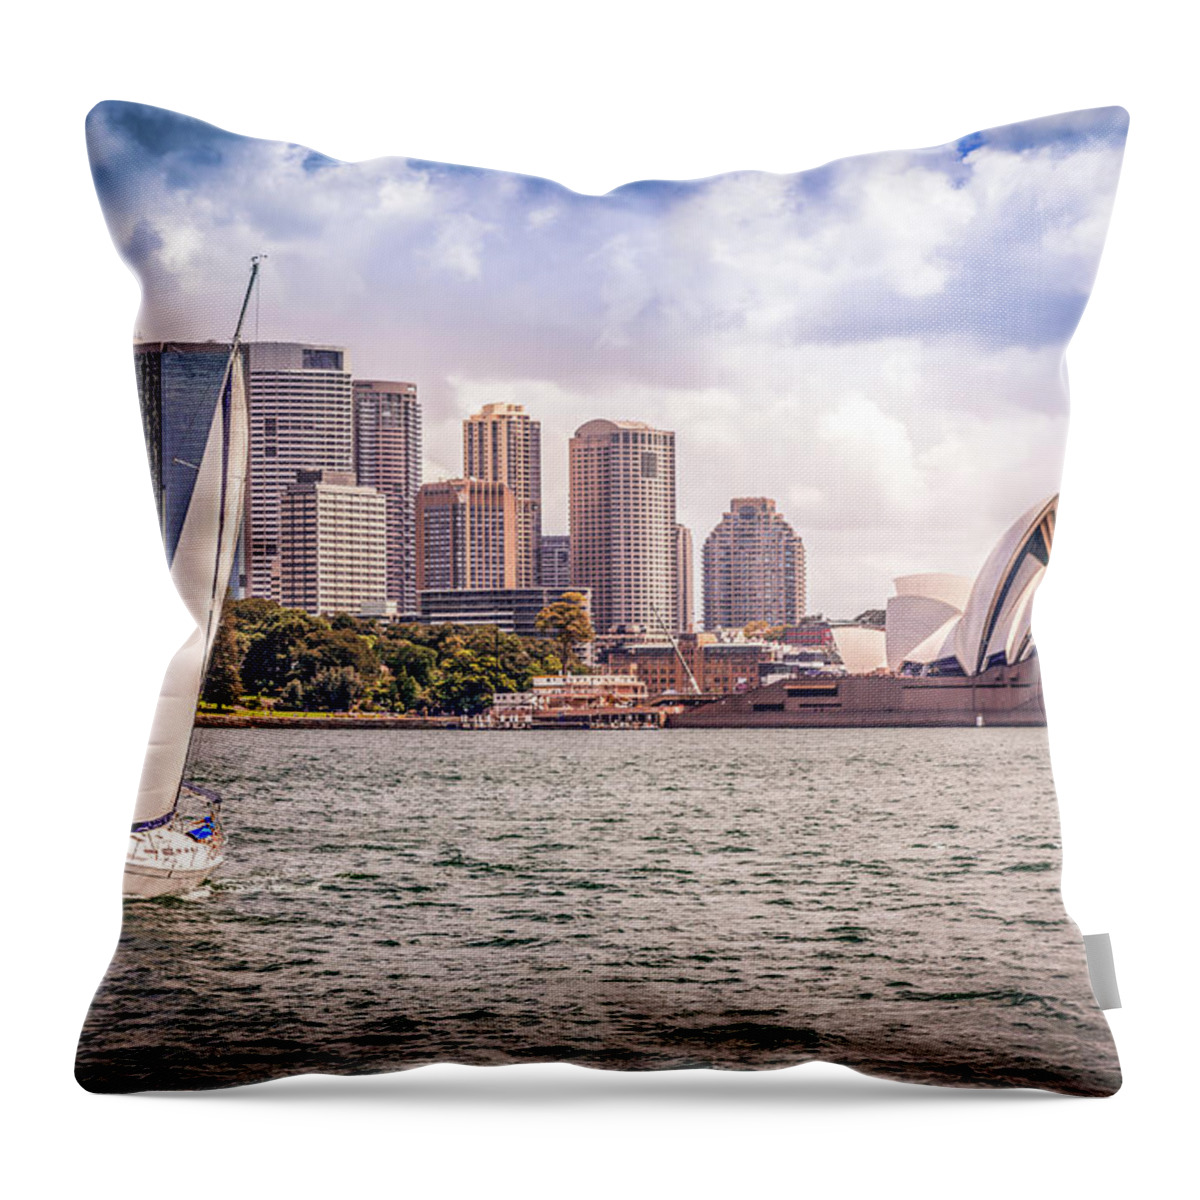 Built Structure Throw Pillow featuring the photograph City Of Sydney Cityscape With Opera by Onfokus